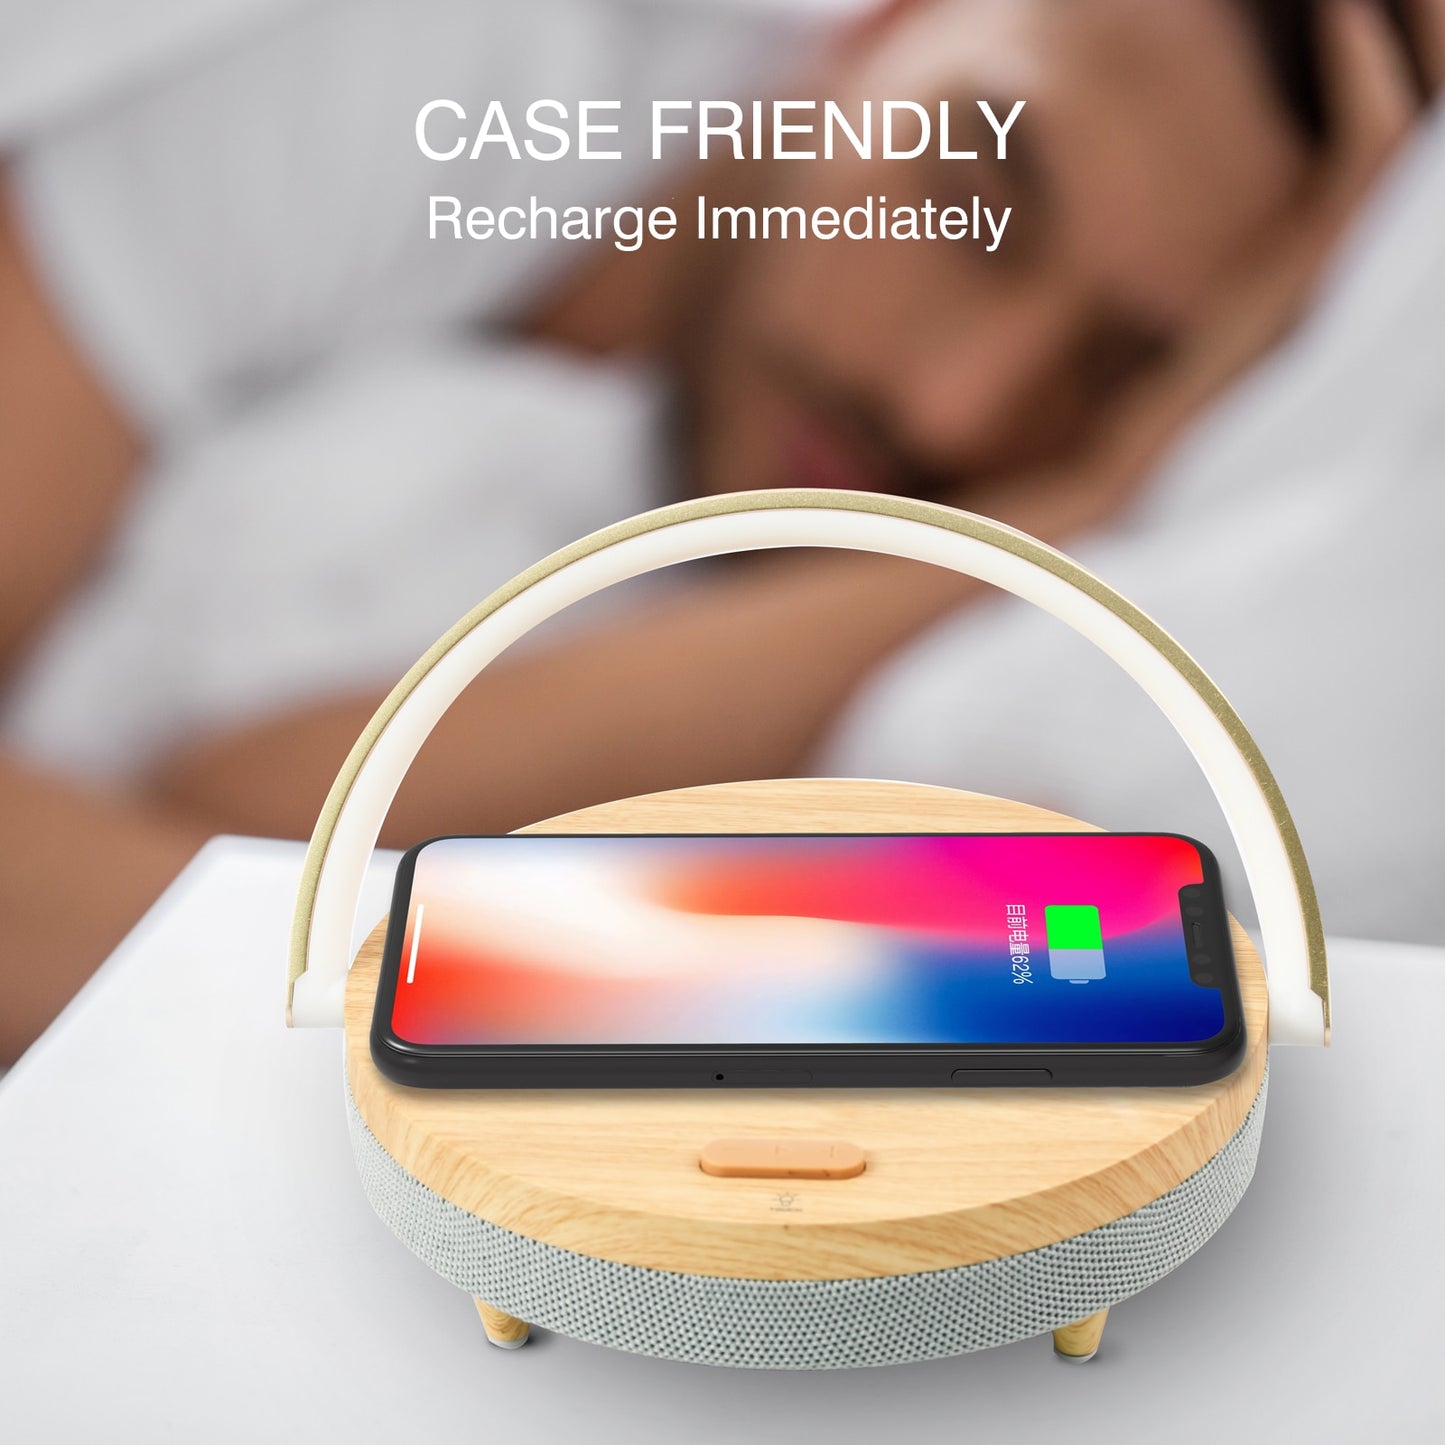 S21Pro Bluetooth Speaker Wood Wireless Charger/Led Lamp 15W High Power Fast Charging for iPhone/Android